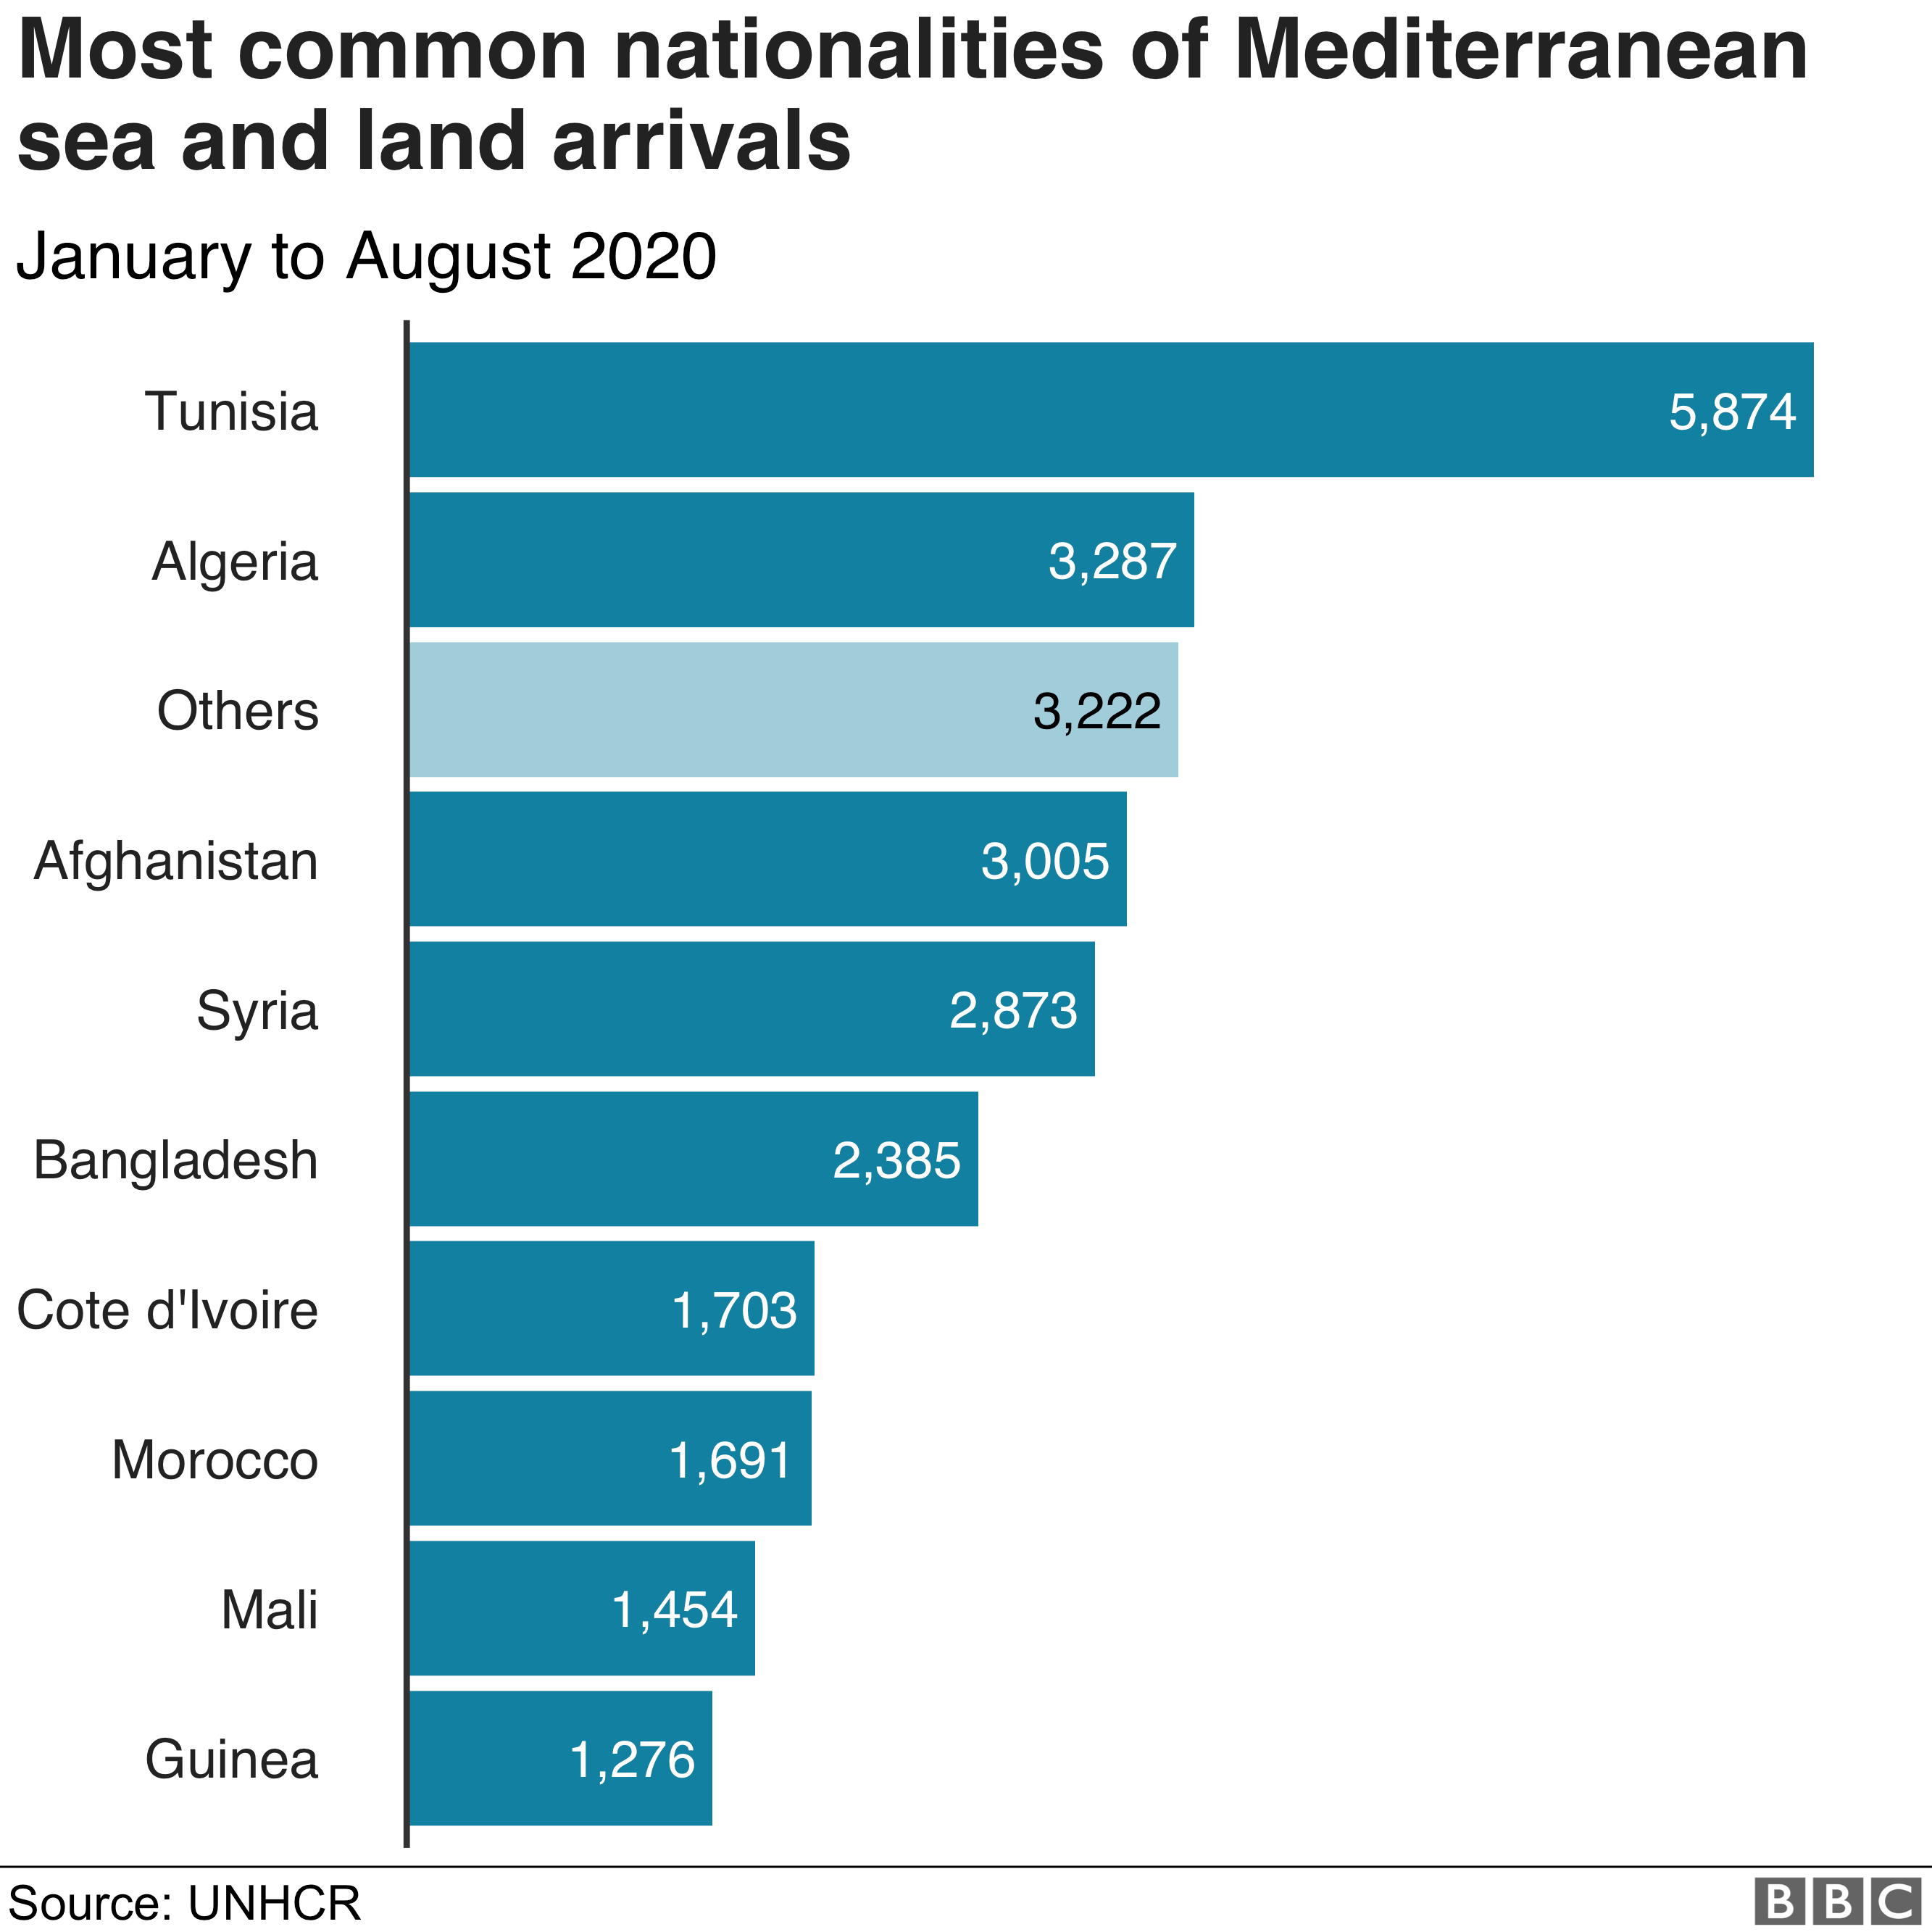 Chart showing the most common nationalities of Mediterranean land and sea arrivals.